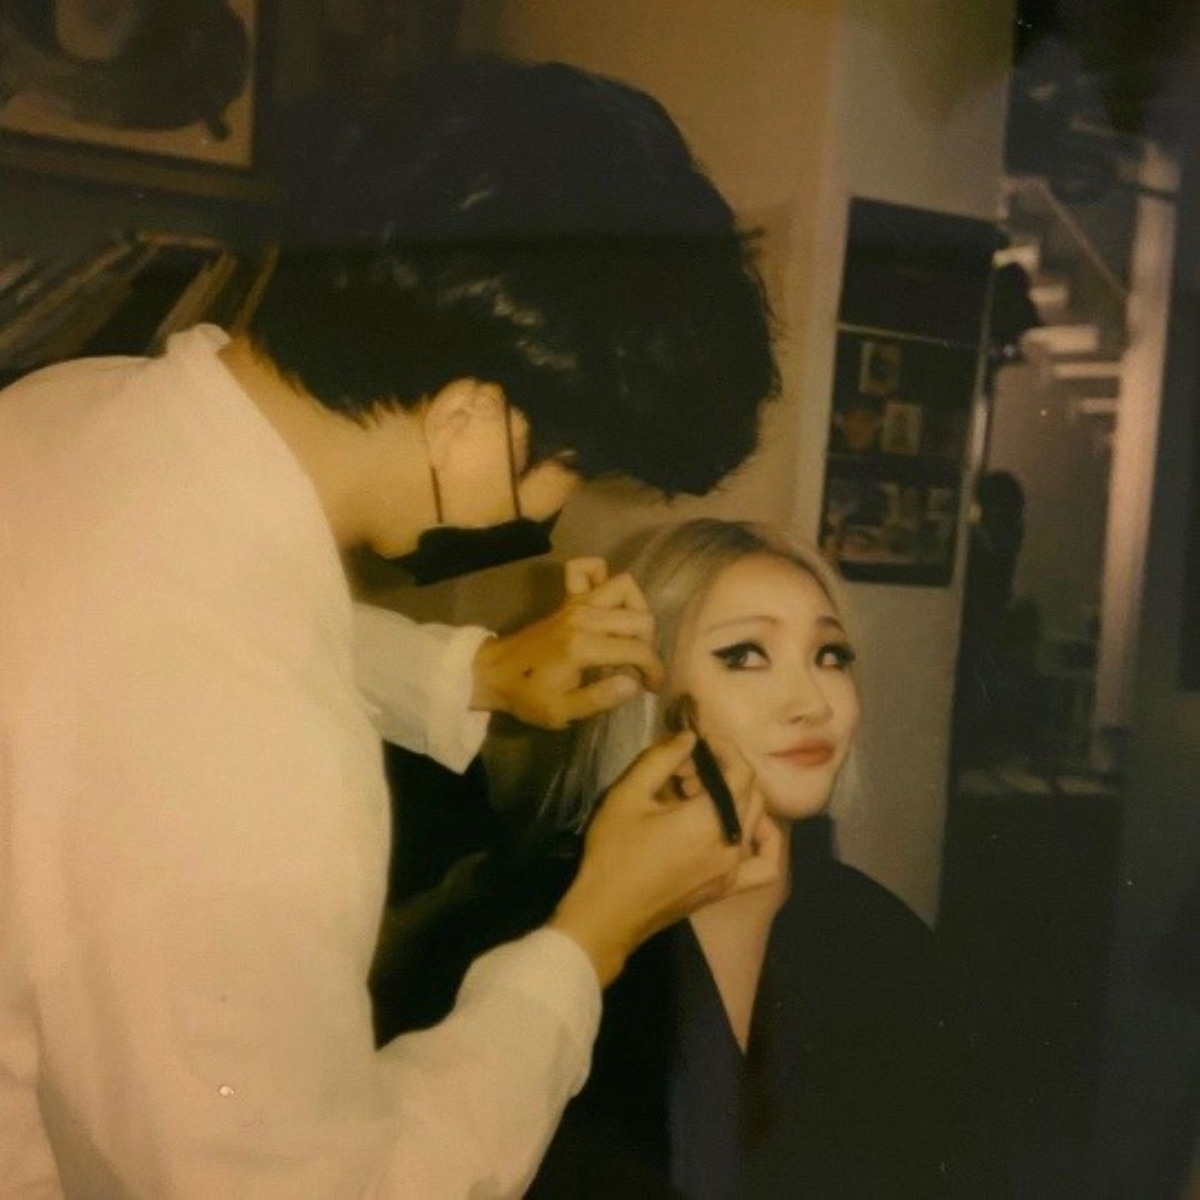 CL, upload cute photos on Instagram on July 17th